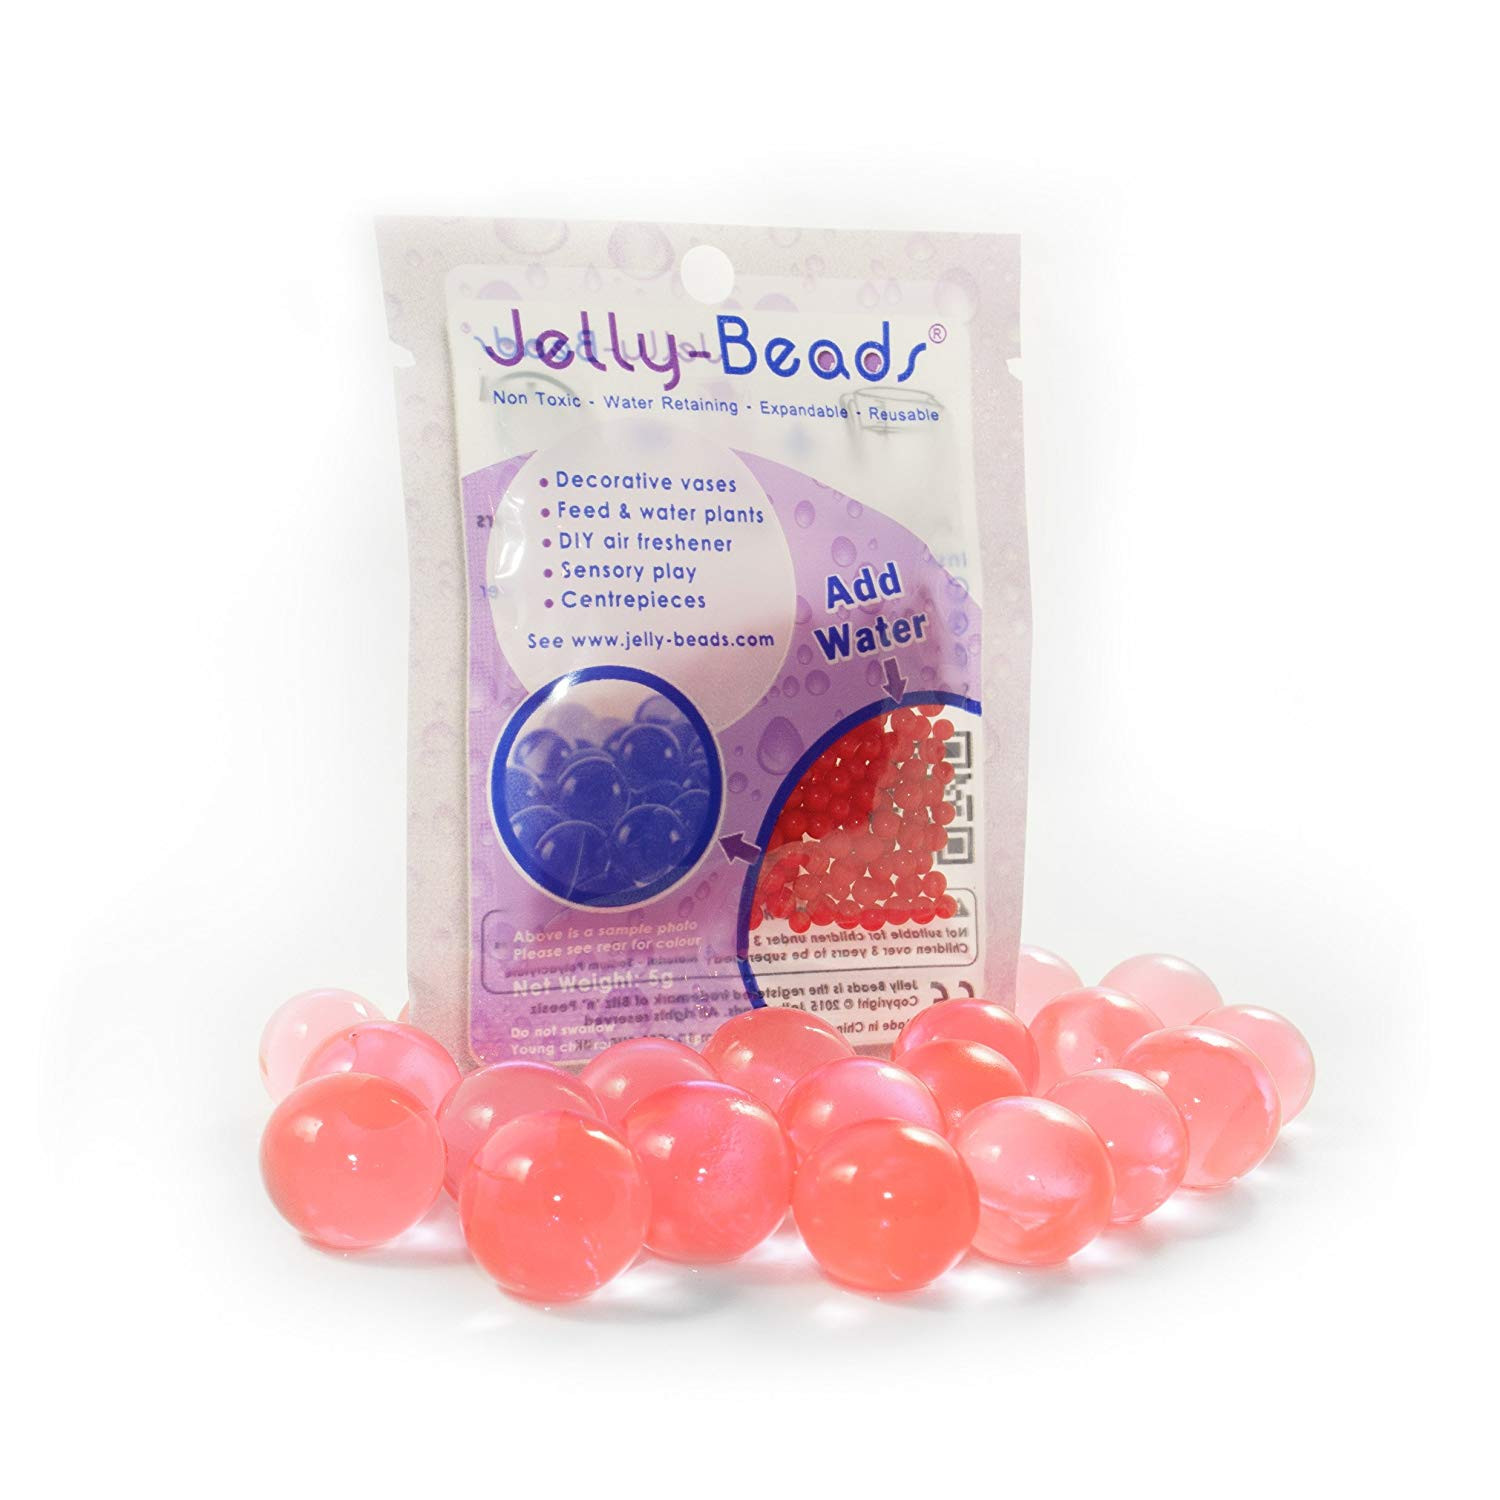 10 Stylish Water Gel Beads for Vases 2022 free download water gel beads for vases of jelly beads a red 10 x 5g decorative water retaining expanding regarding jelly beads a red 10 x 5g decorative water retaining expanding beads ideal for vases wed